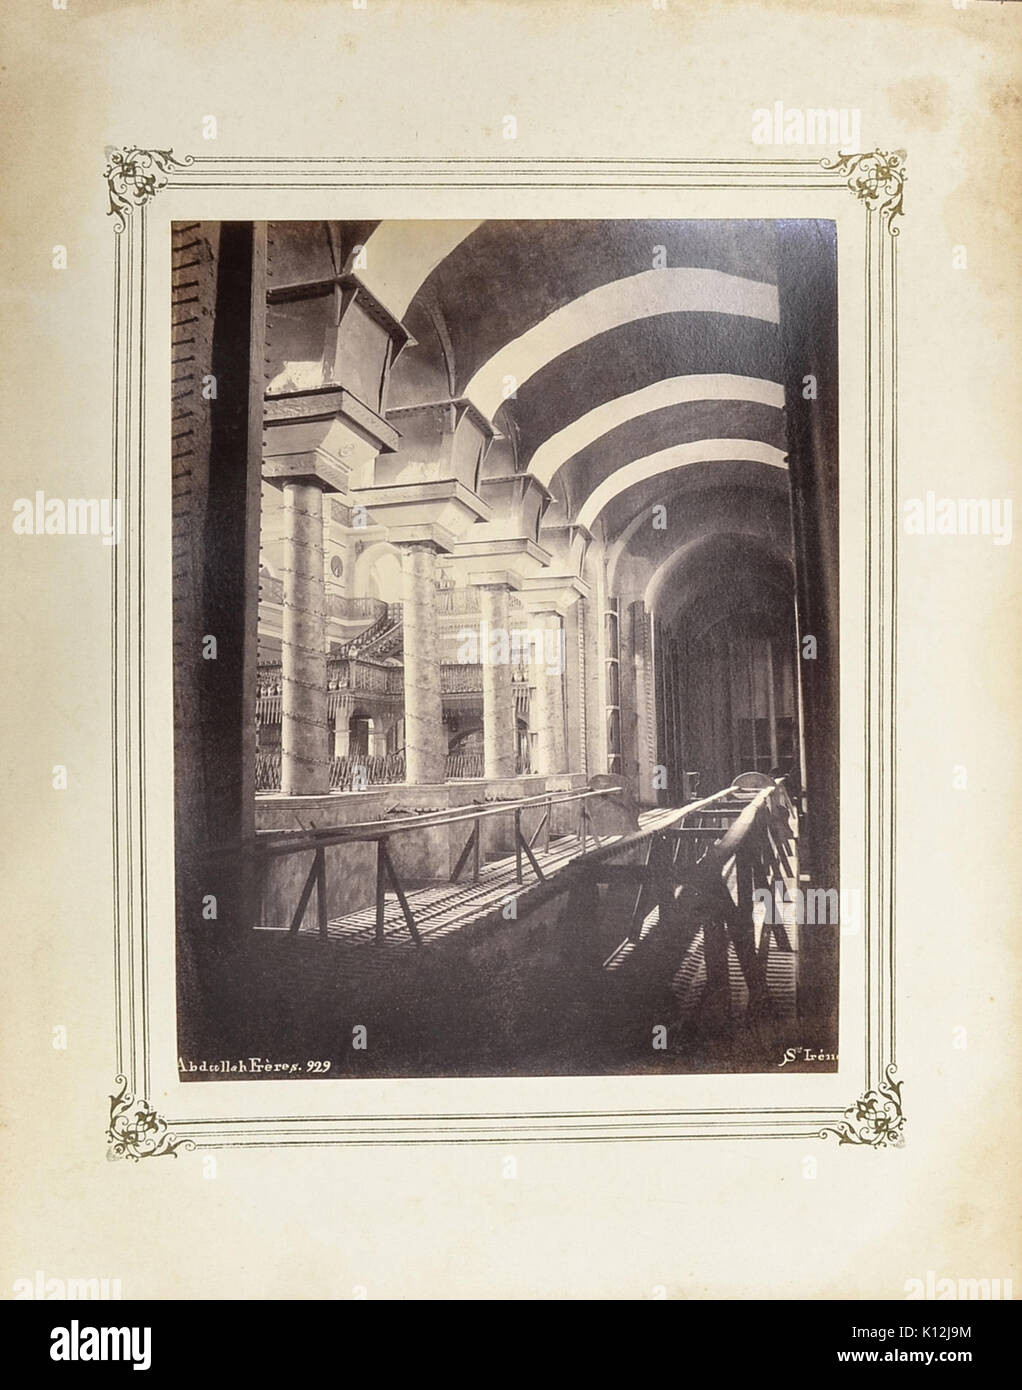 Album of Photographs of Views of the Interior of the Ottoman Military Museum in the Former Church of St. Irene, Constantinople MET LC 2016 649 004 Stock Photo